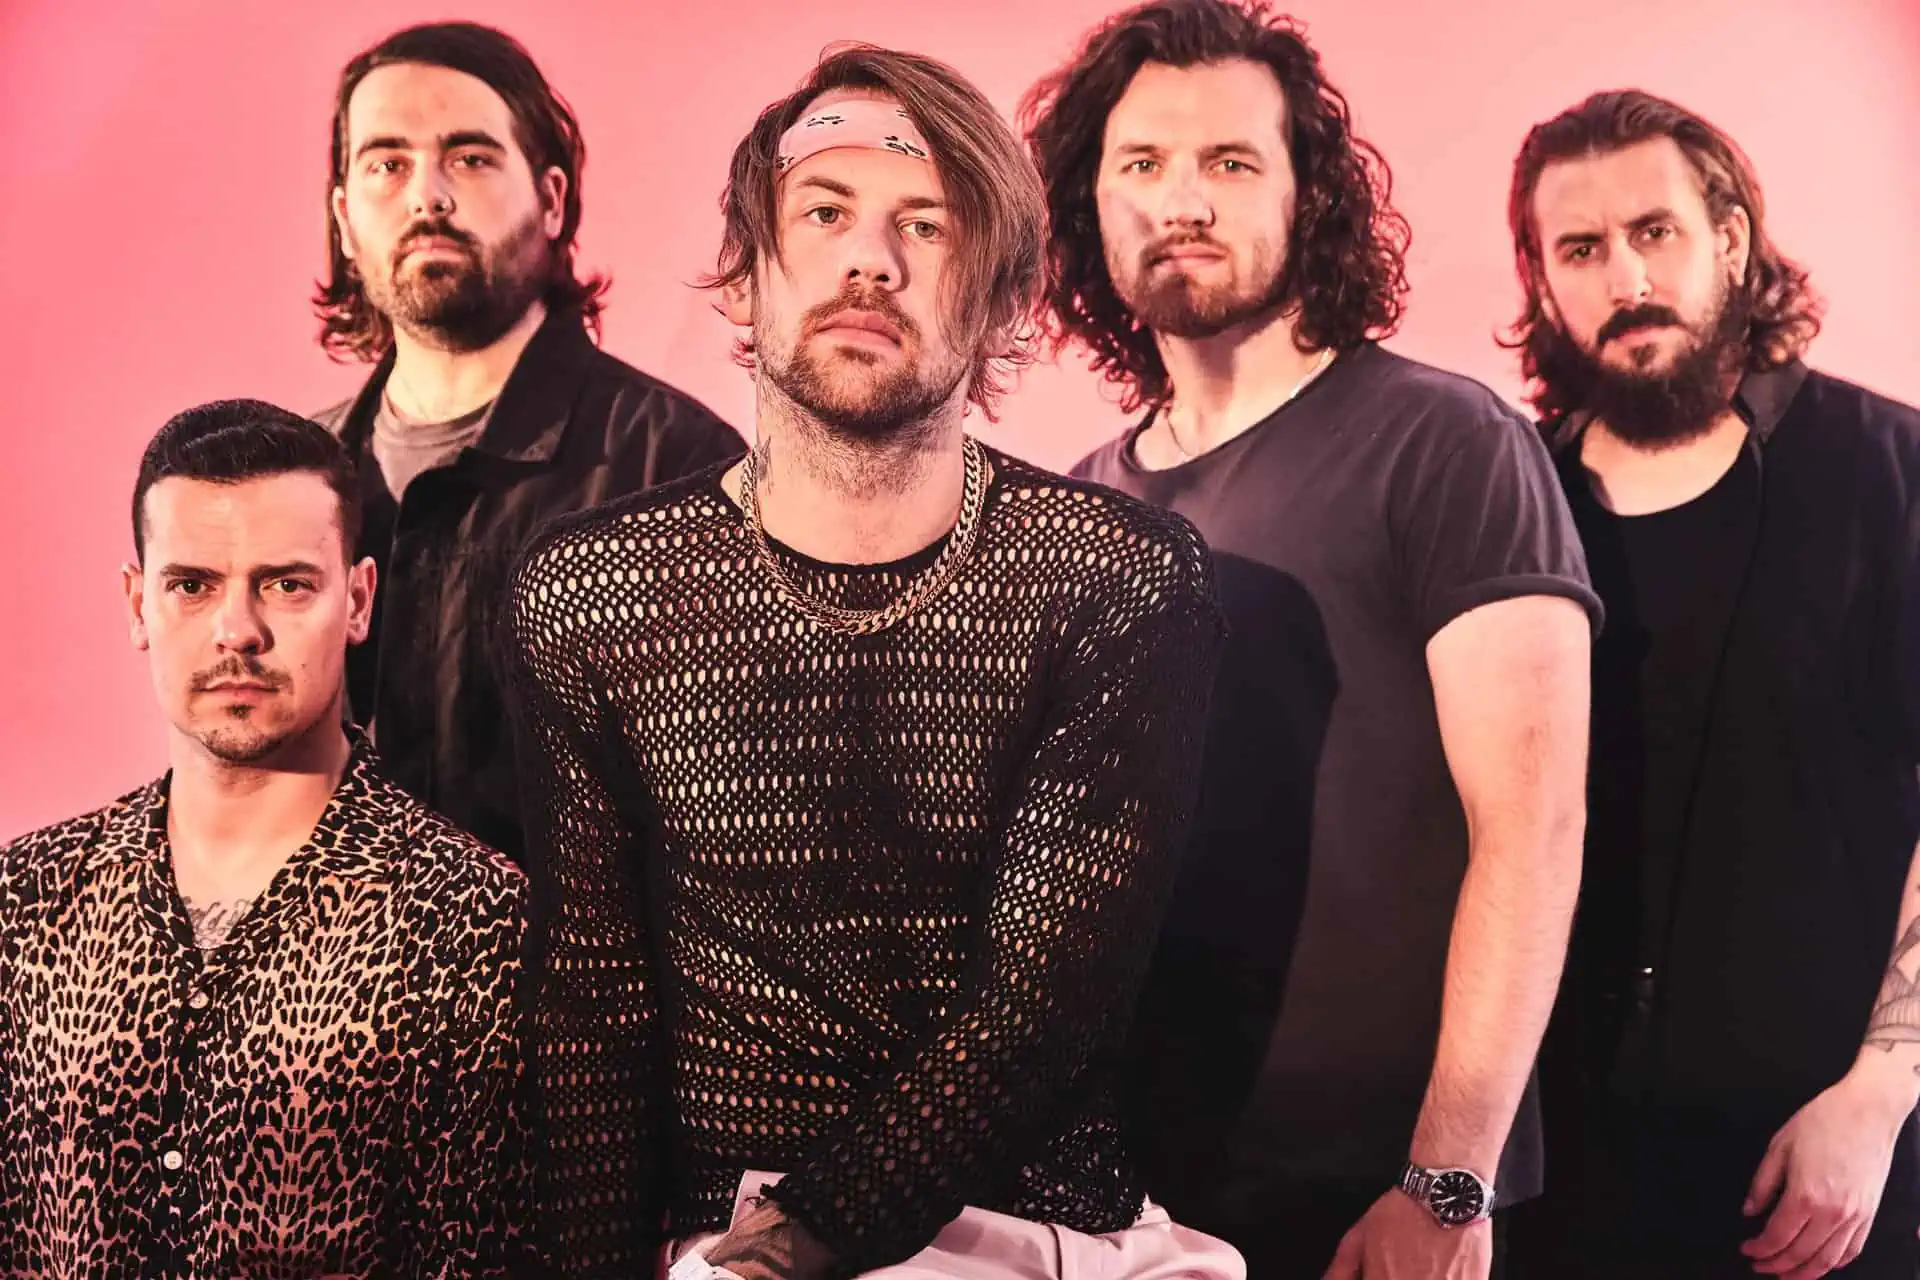 The band beartooth posts on a pink backdrop